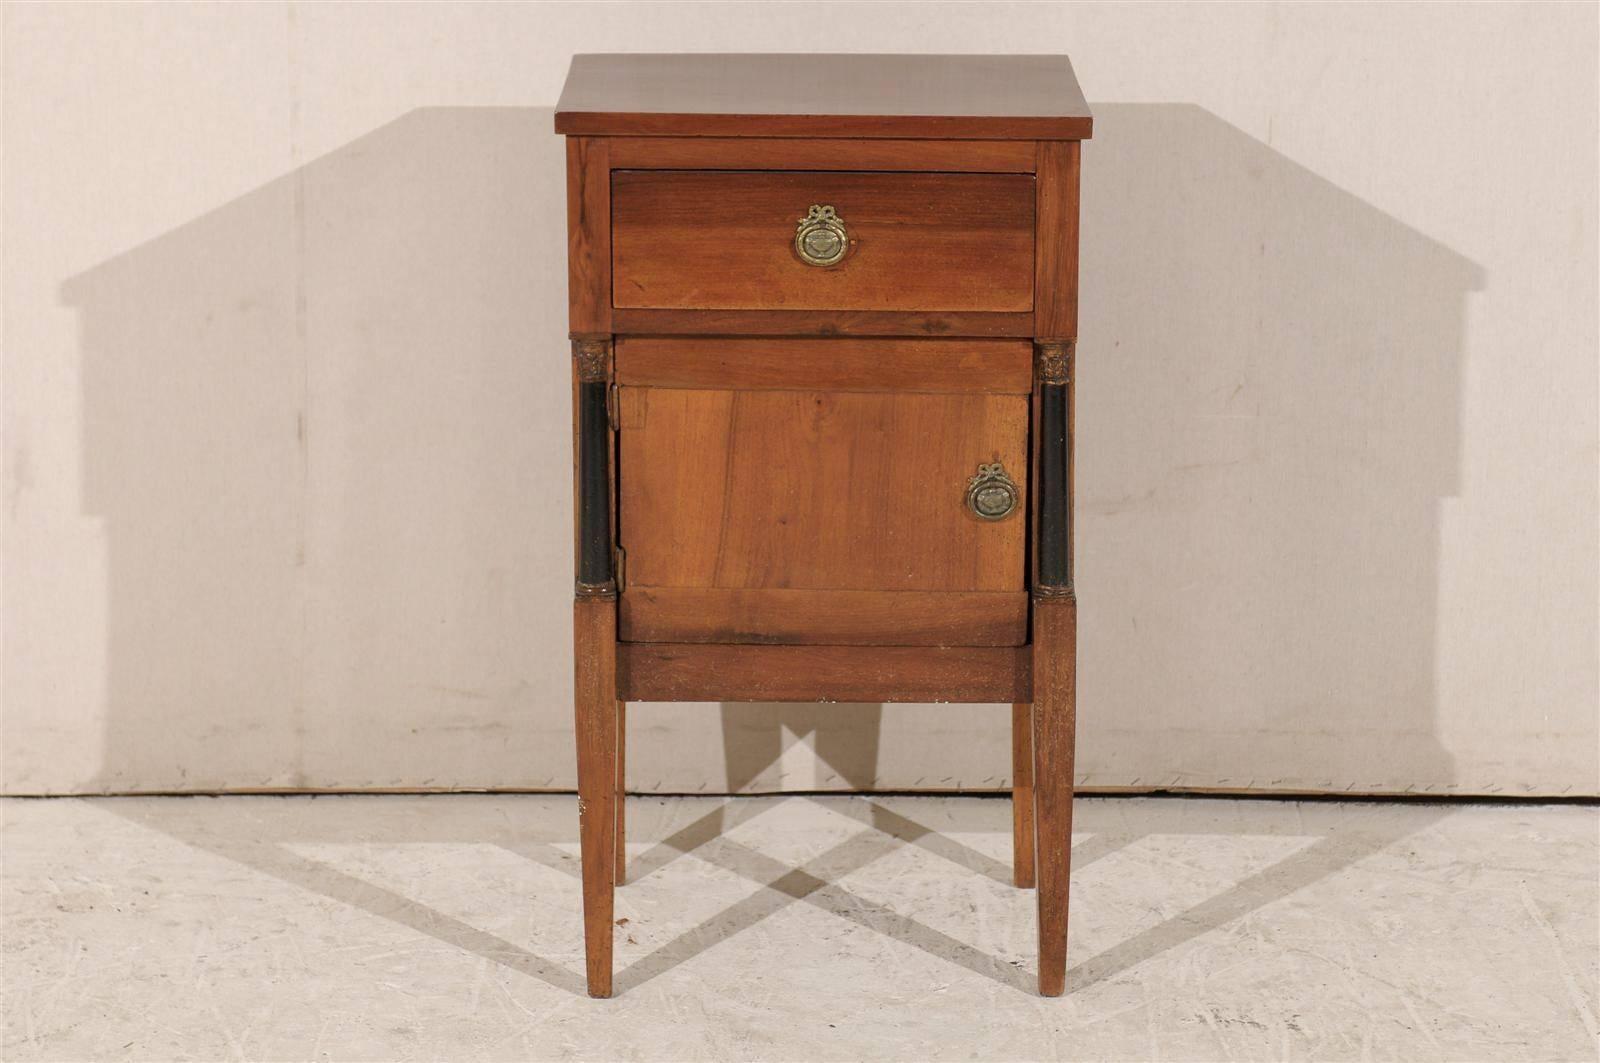 A French early 19th century Empire single drawer, single door wood chest. This lovely little chest is flanked with black half-columns and stands on tapered legs. The back of this piece unfinished, typical of the time period.